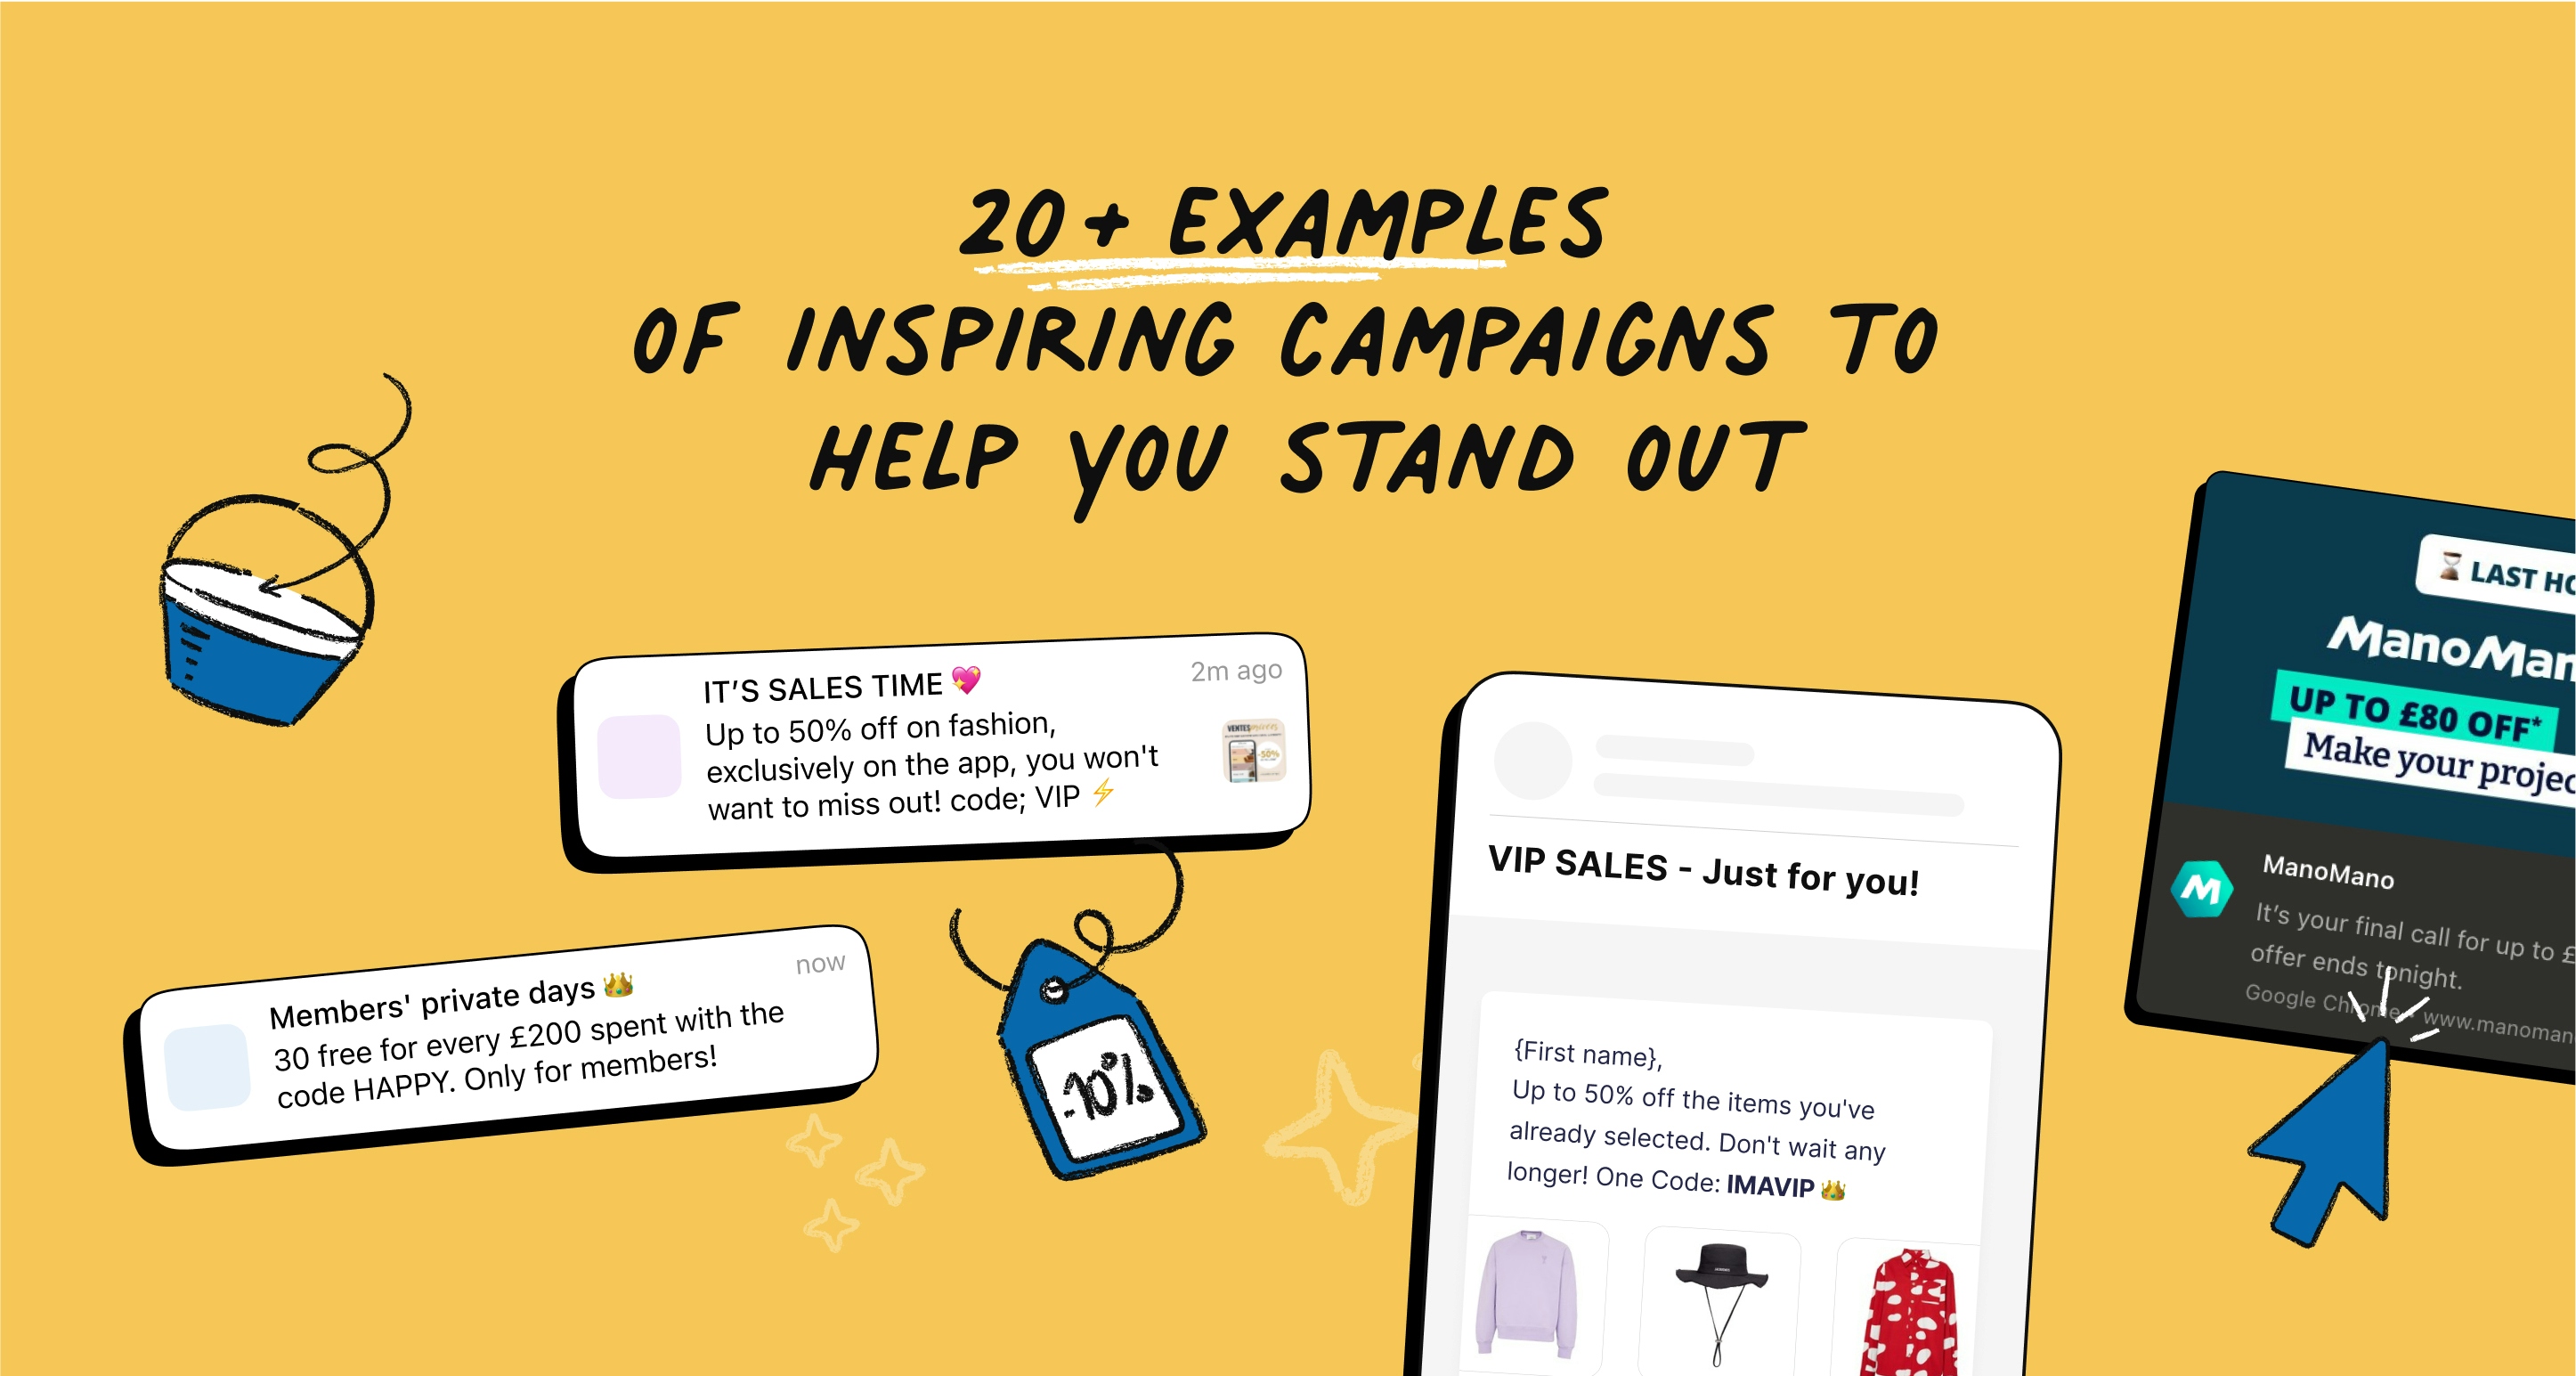 Sales: 20+ examples of inspiring campaigns to help you stand out!